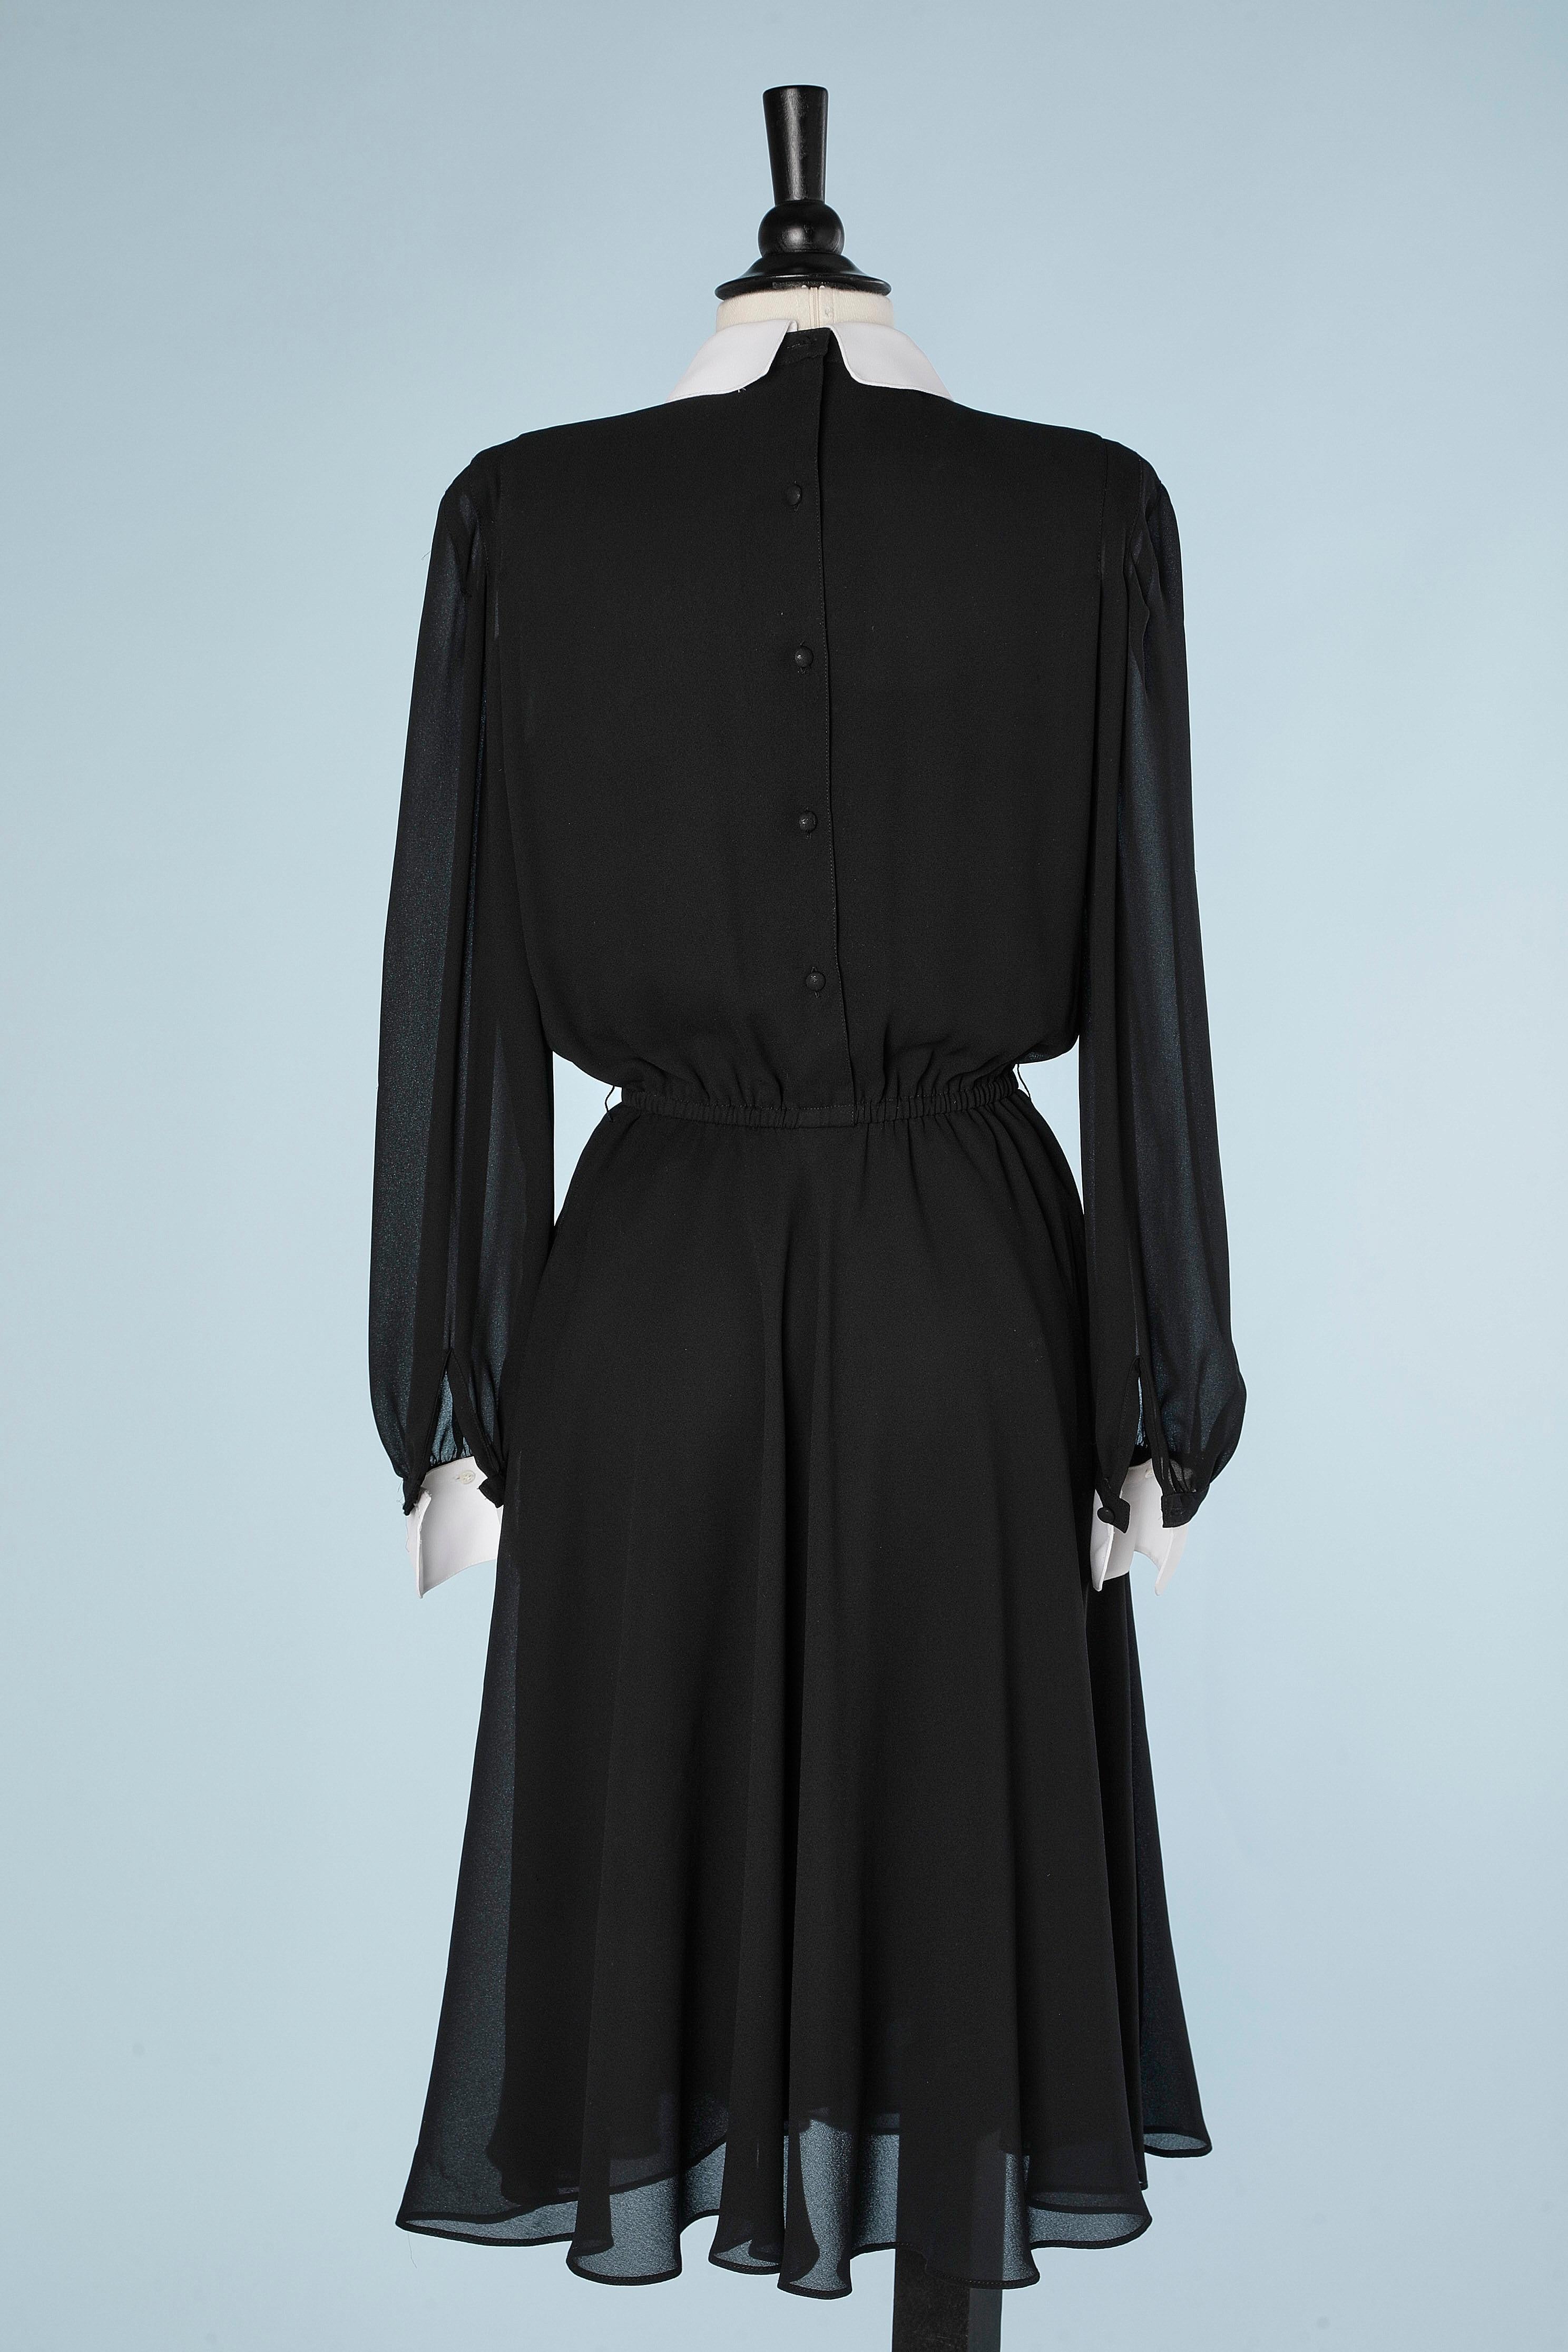 Women's Black chiffon dress with white collar and cuffs Pierre Cardin Boutique 